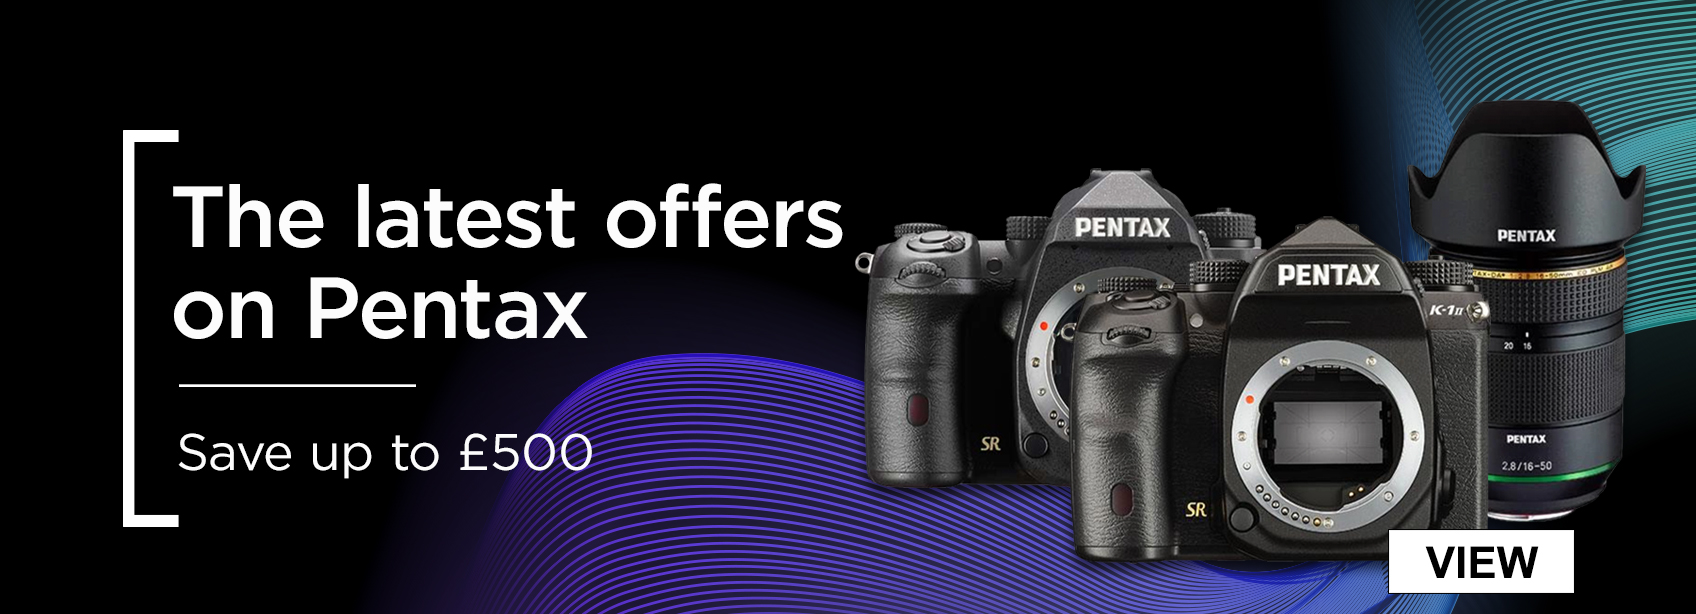 The latest offers on Pentax - Save up to £500